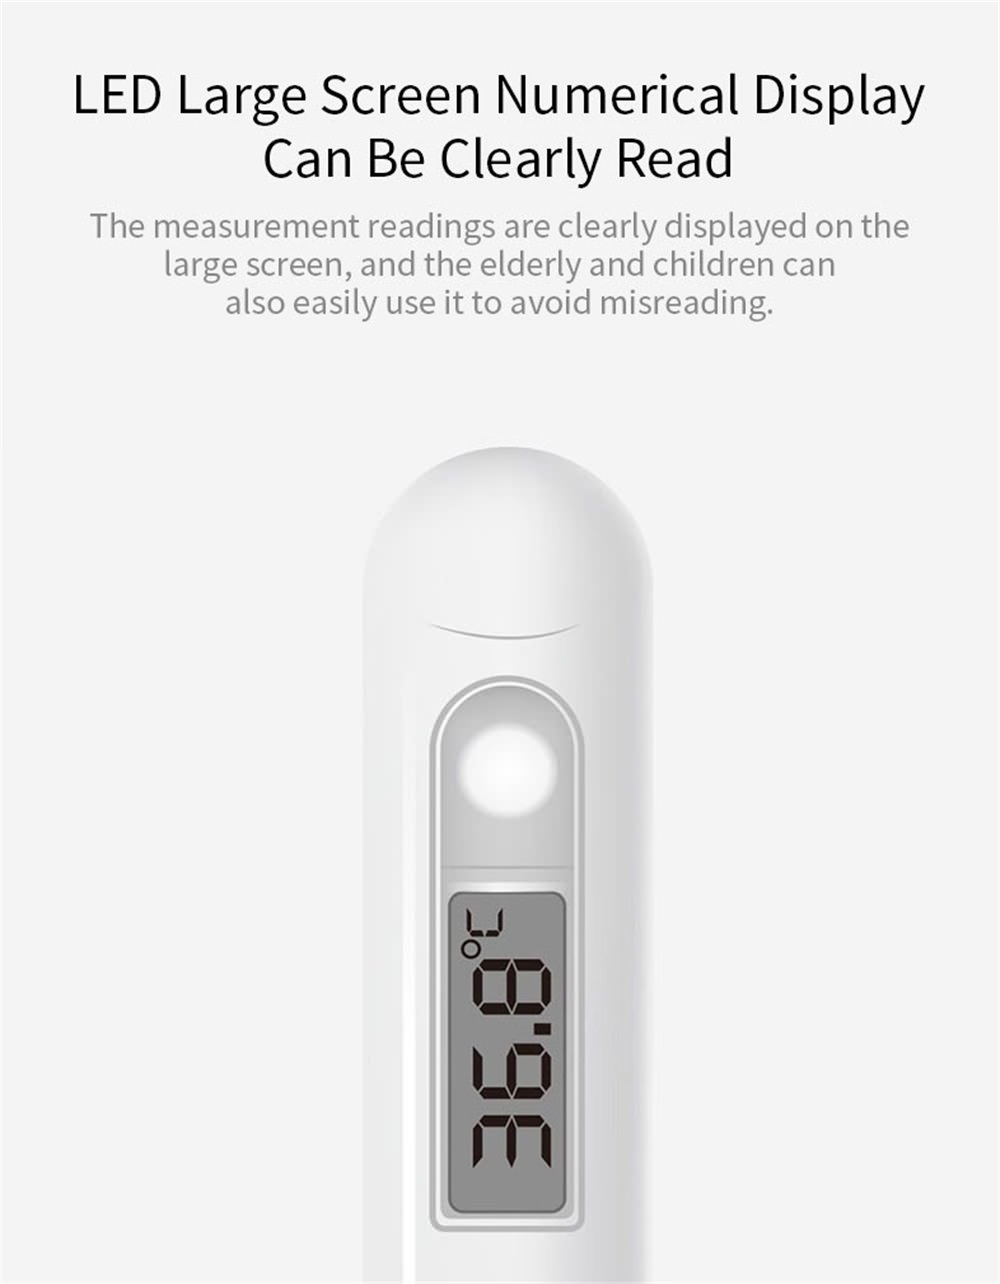 buy xiaomi ihealth pt-101b led thermometer